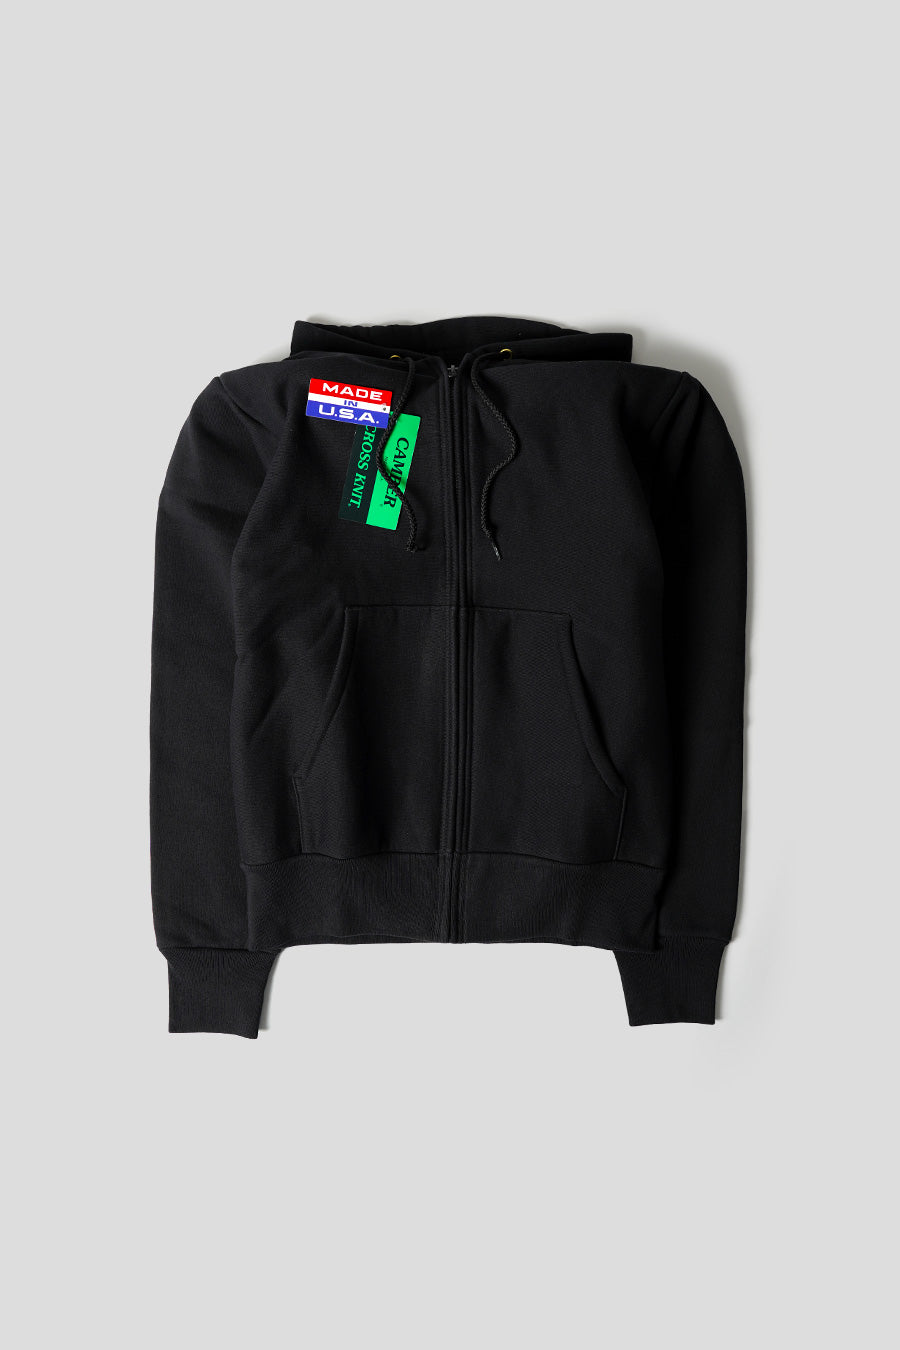 CAMBER USA - HOODIE ZIP CROSS KNIT NOIR - LE LABO STORE